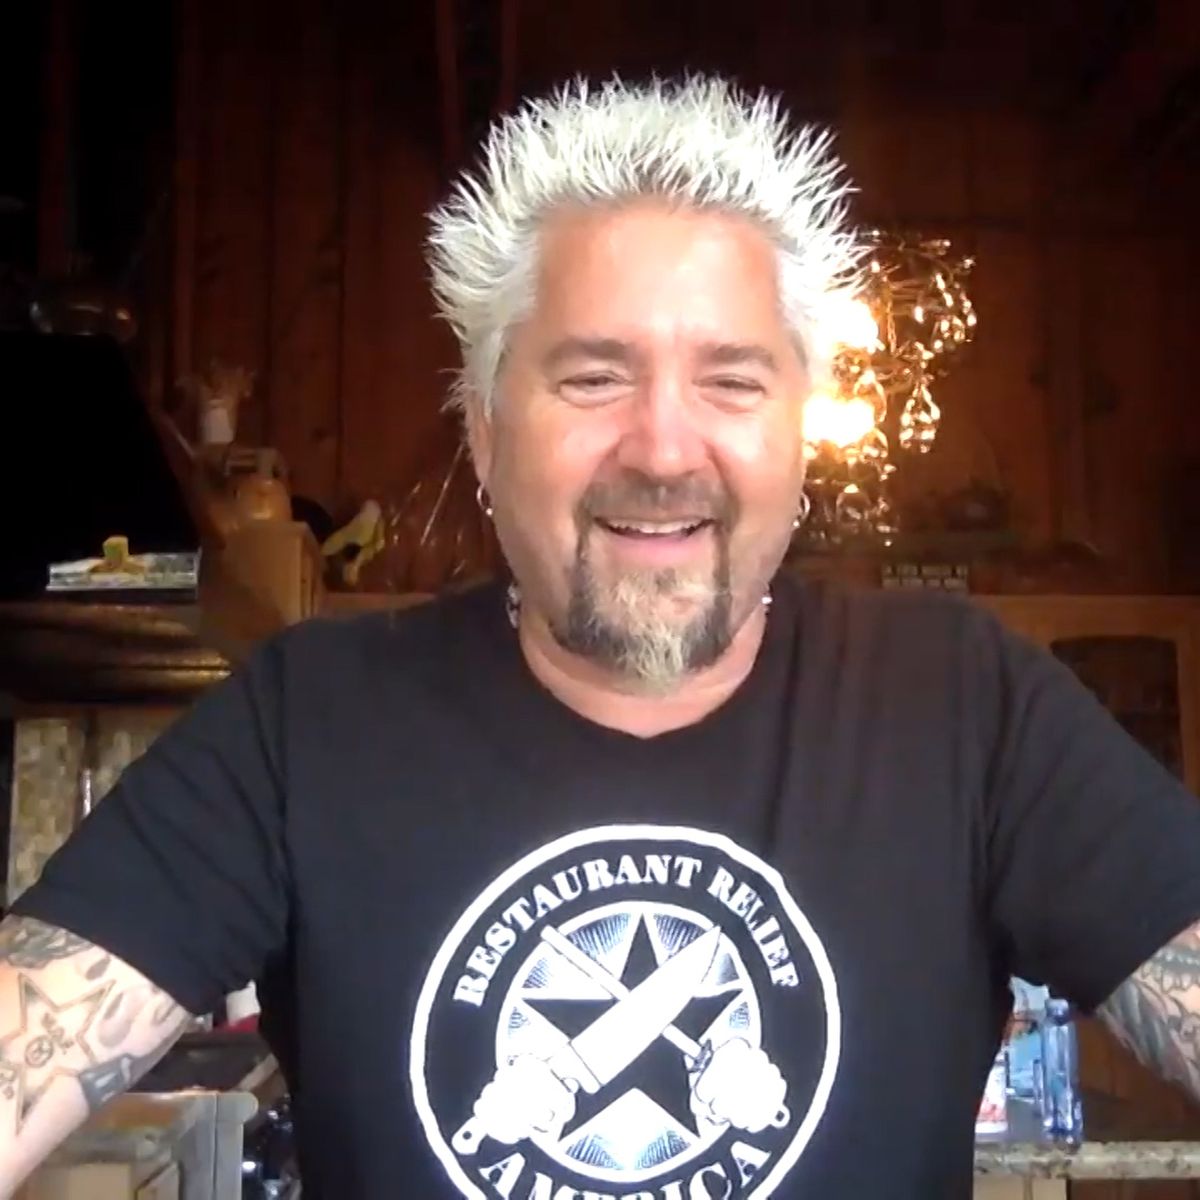 Guy Fieri Says He Eats Mostly Veggies And Salads—Not Fried Foods